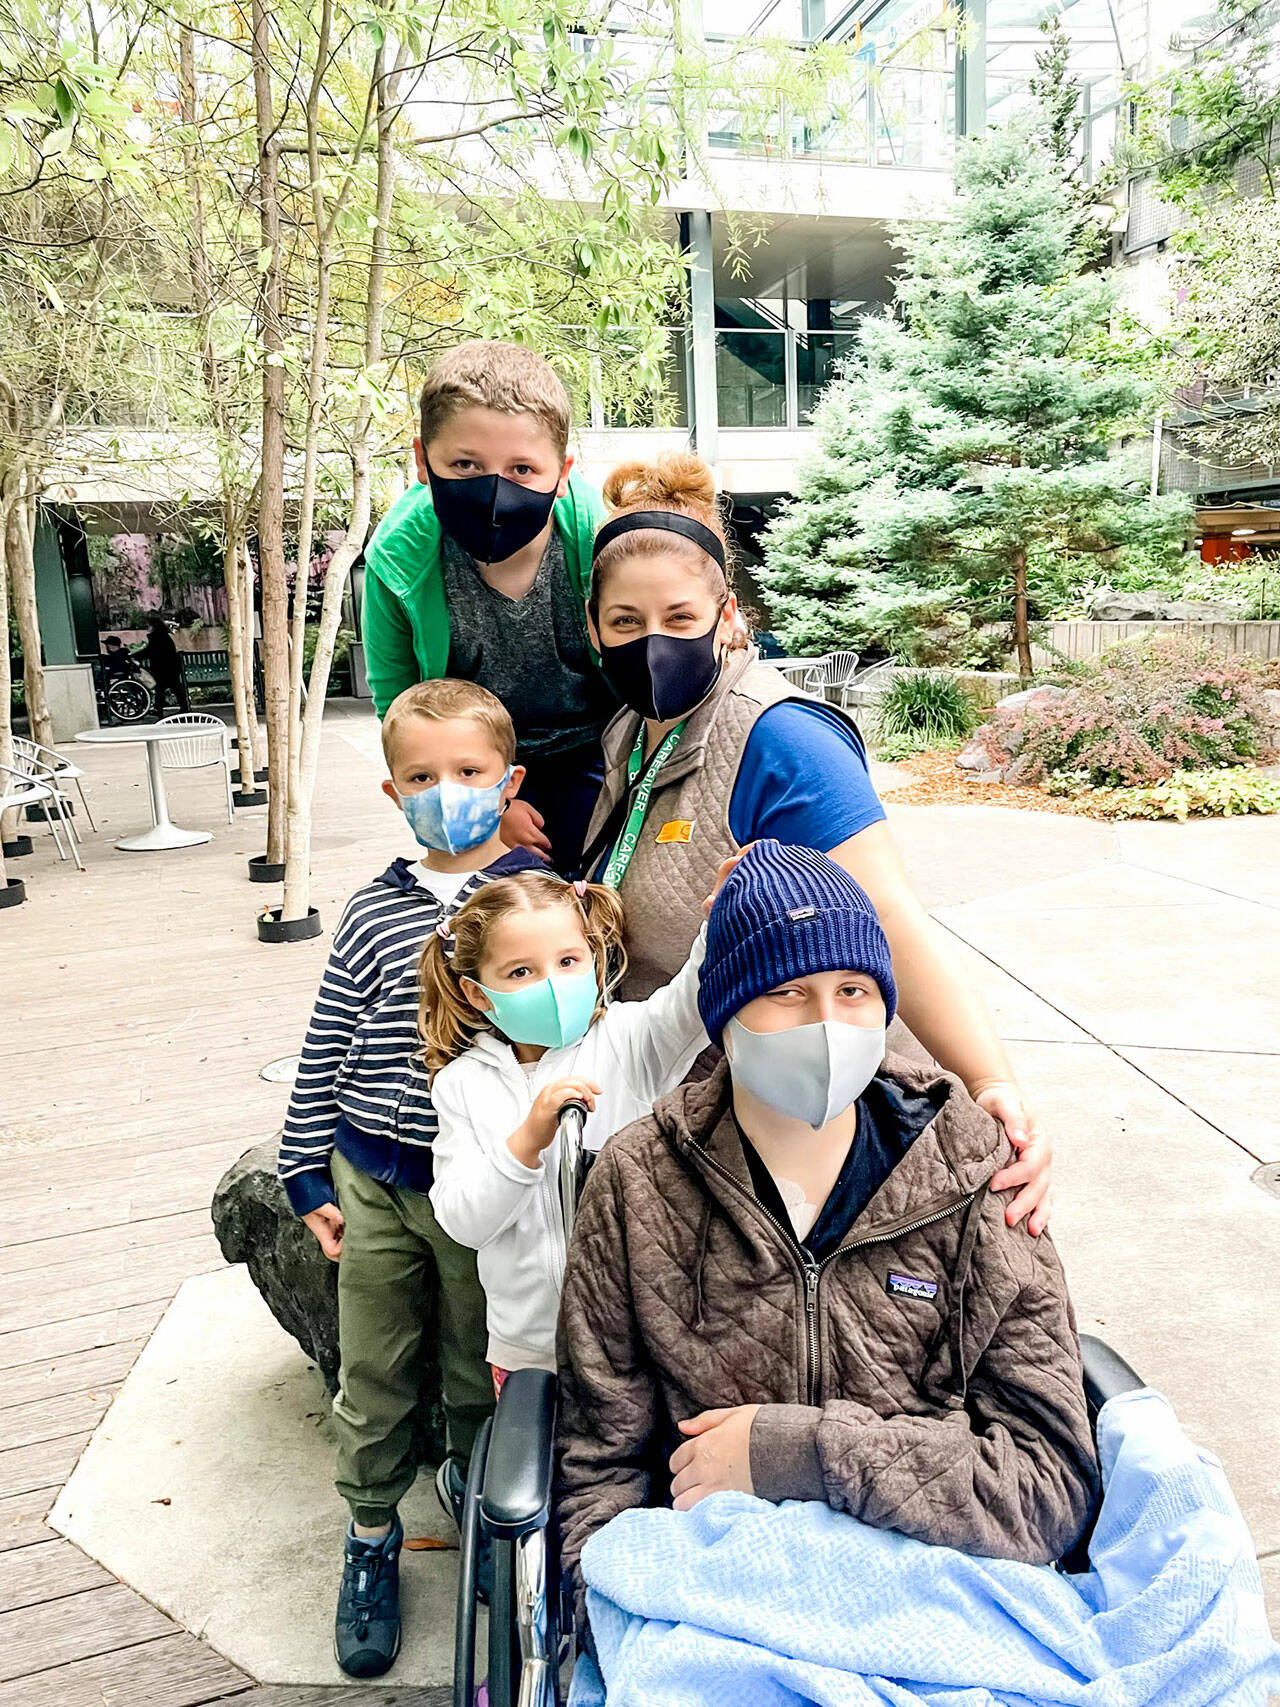 Five of the members of 6 person Ake family pose outside the Seattle Children’s hospital. Emerson Ake, in the front, is battling leukemia with quiet courage and good humor and his family temporarily moved from Sequim to stay together. Photo courtesy of the Ake family